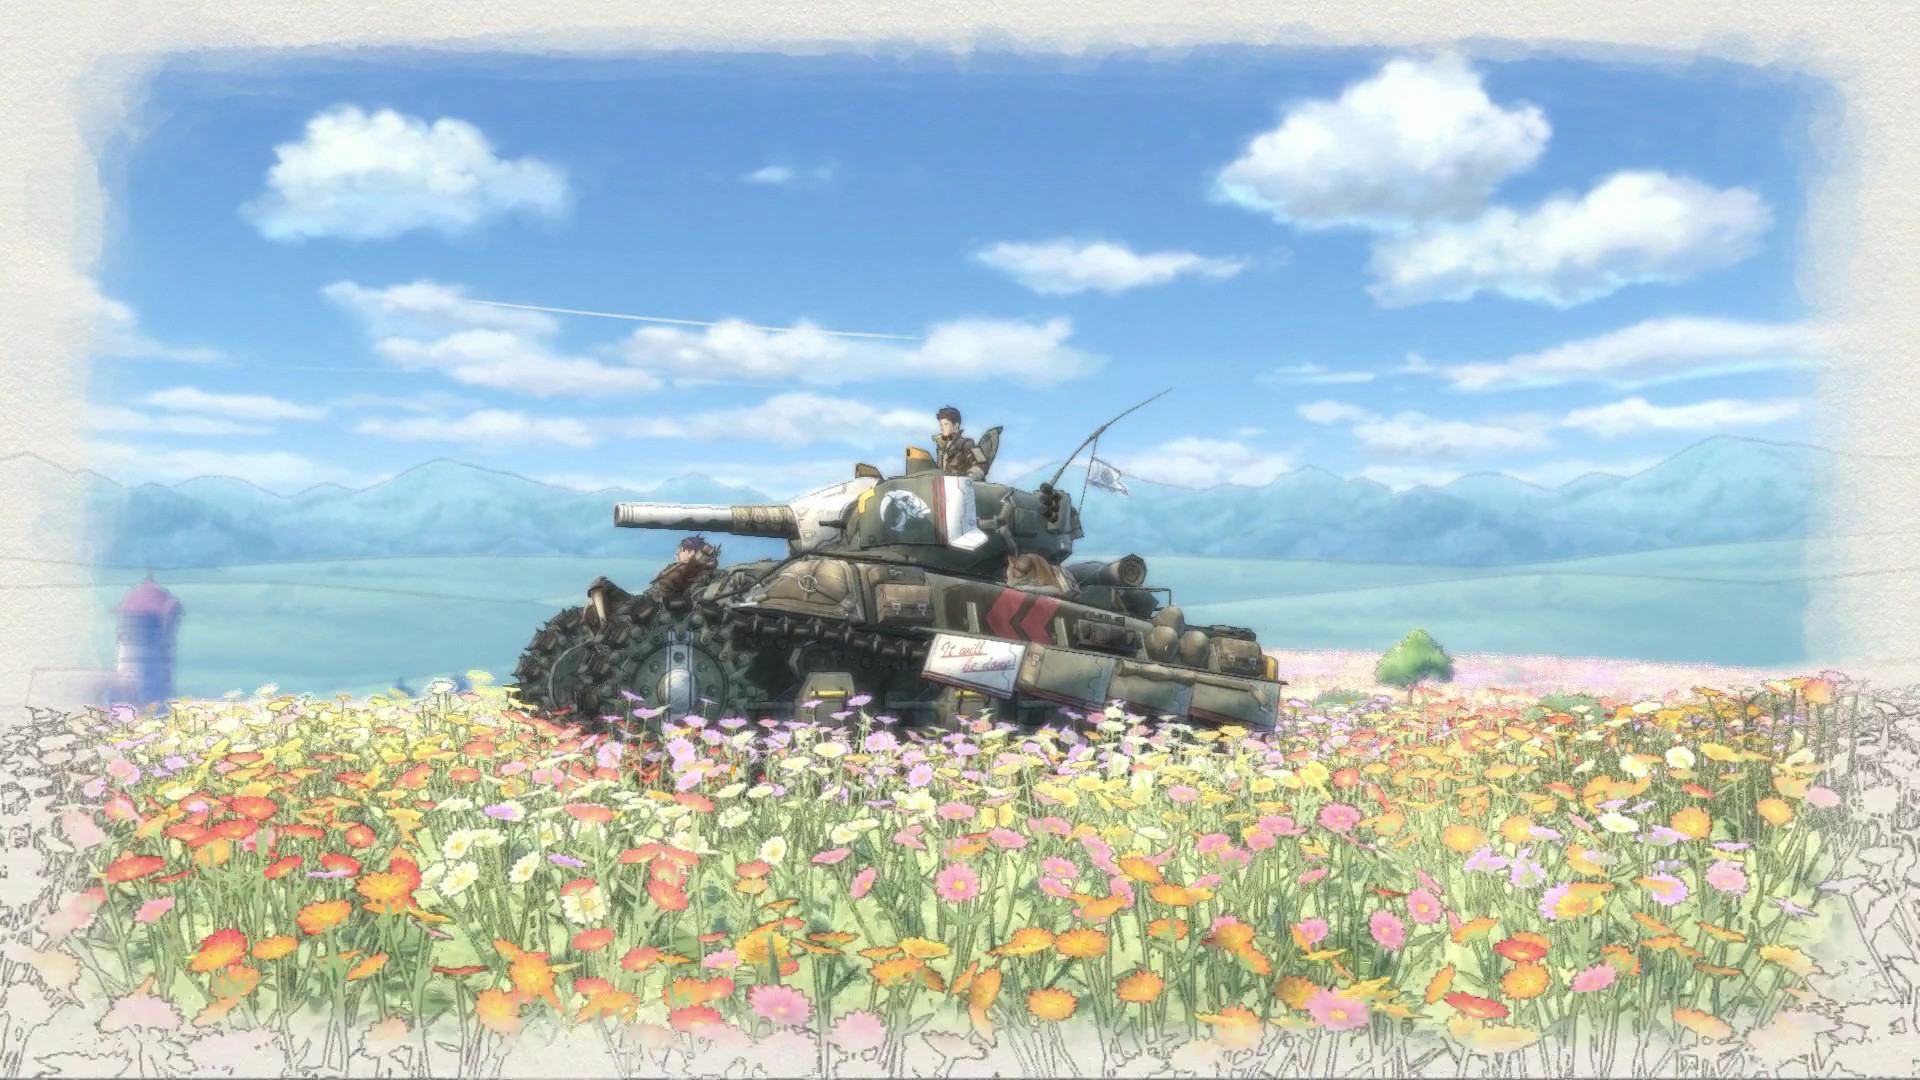 Best tank games: Valkyria Chronicles 4. Image shows a tank driving through a meadow.